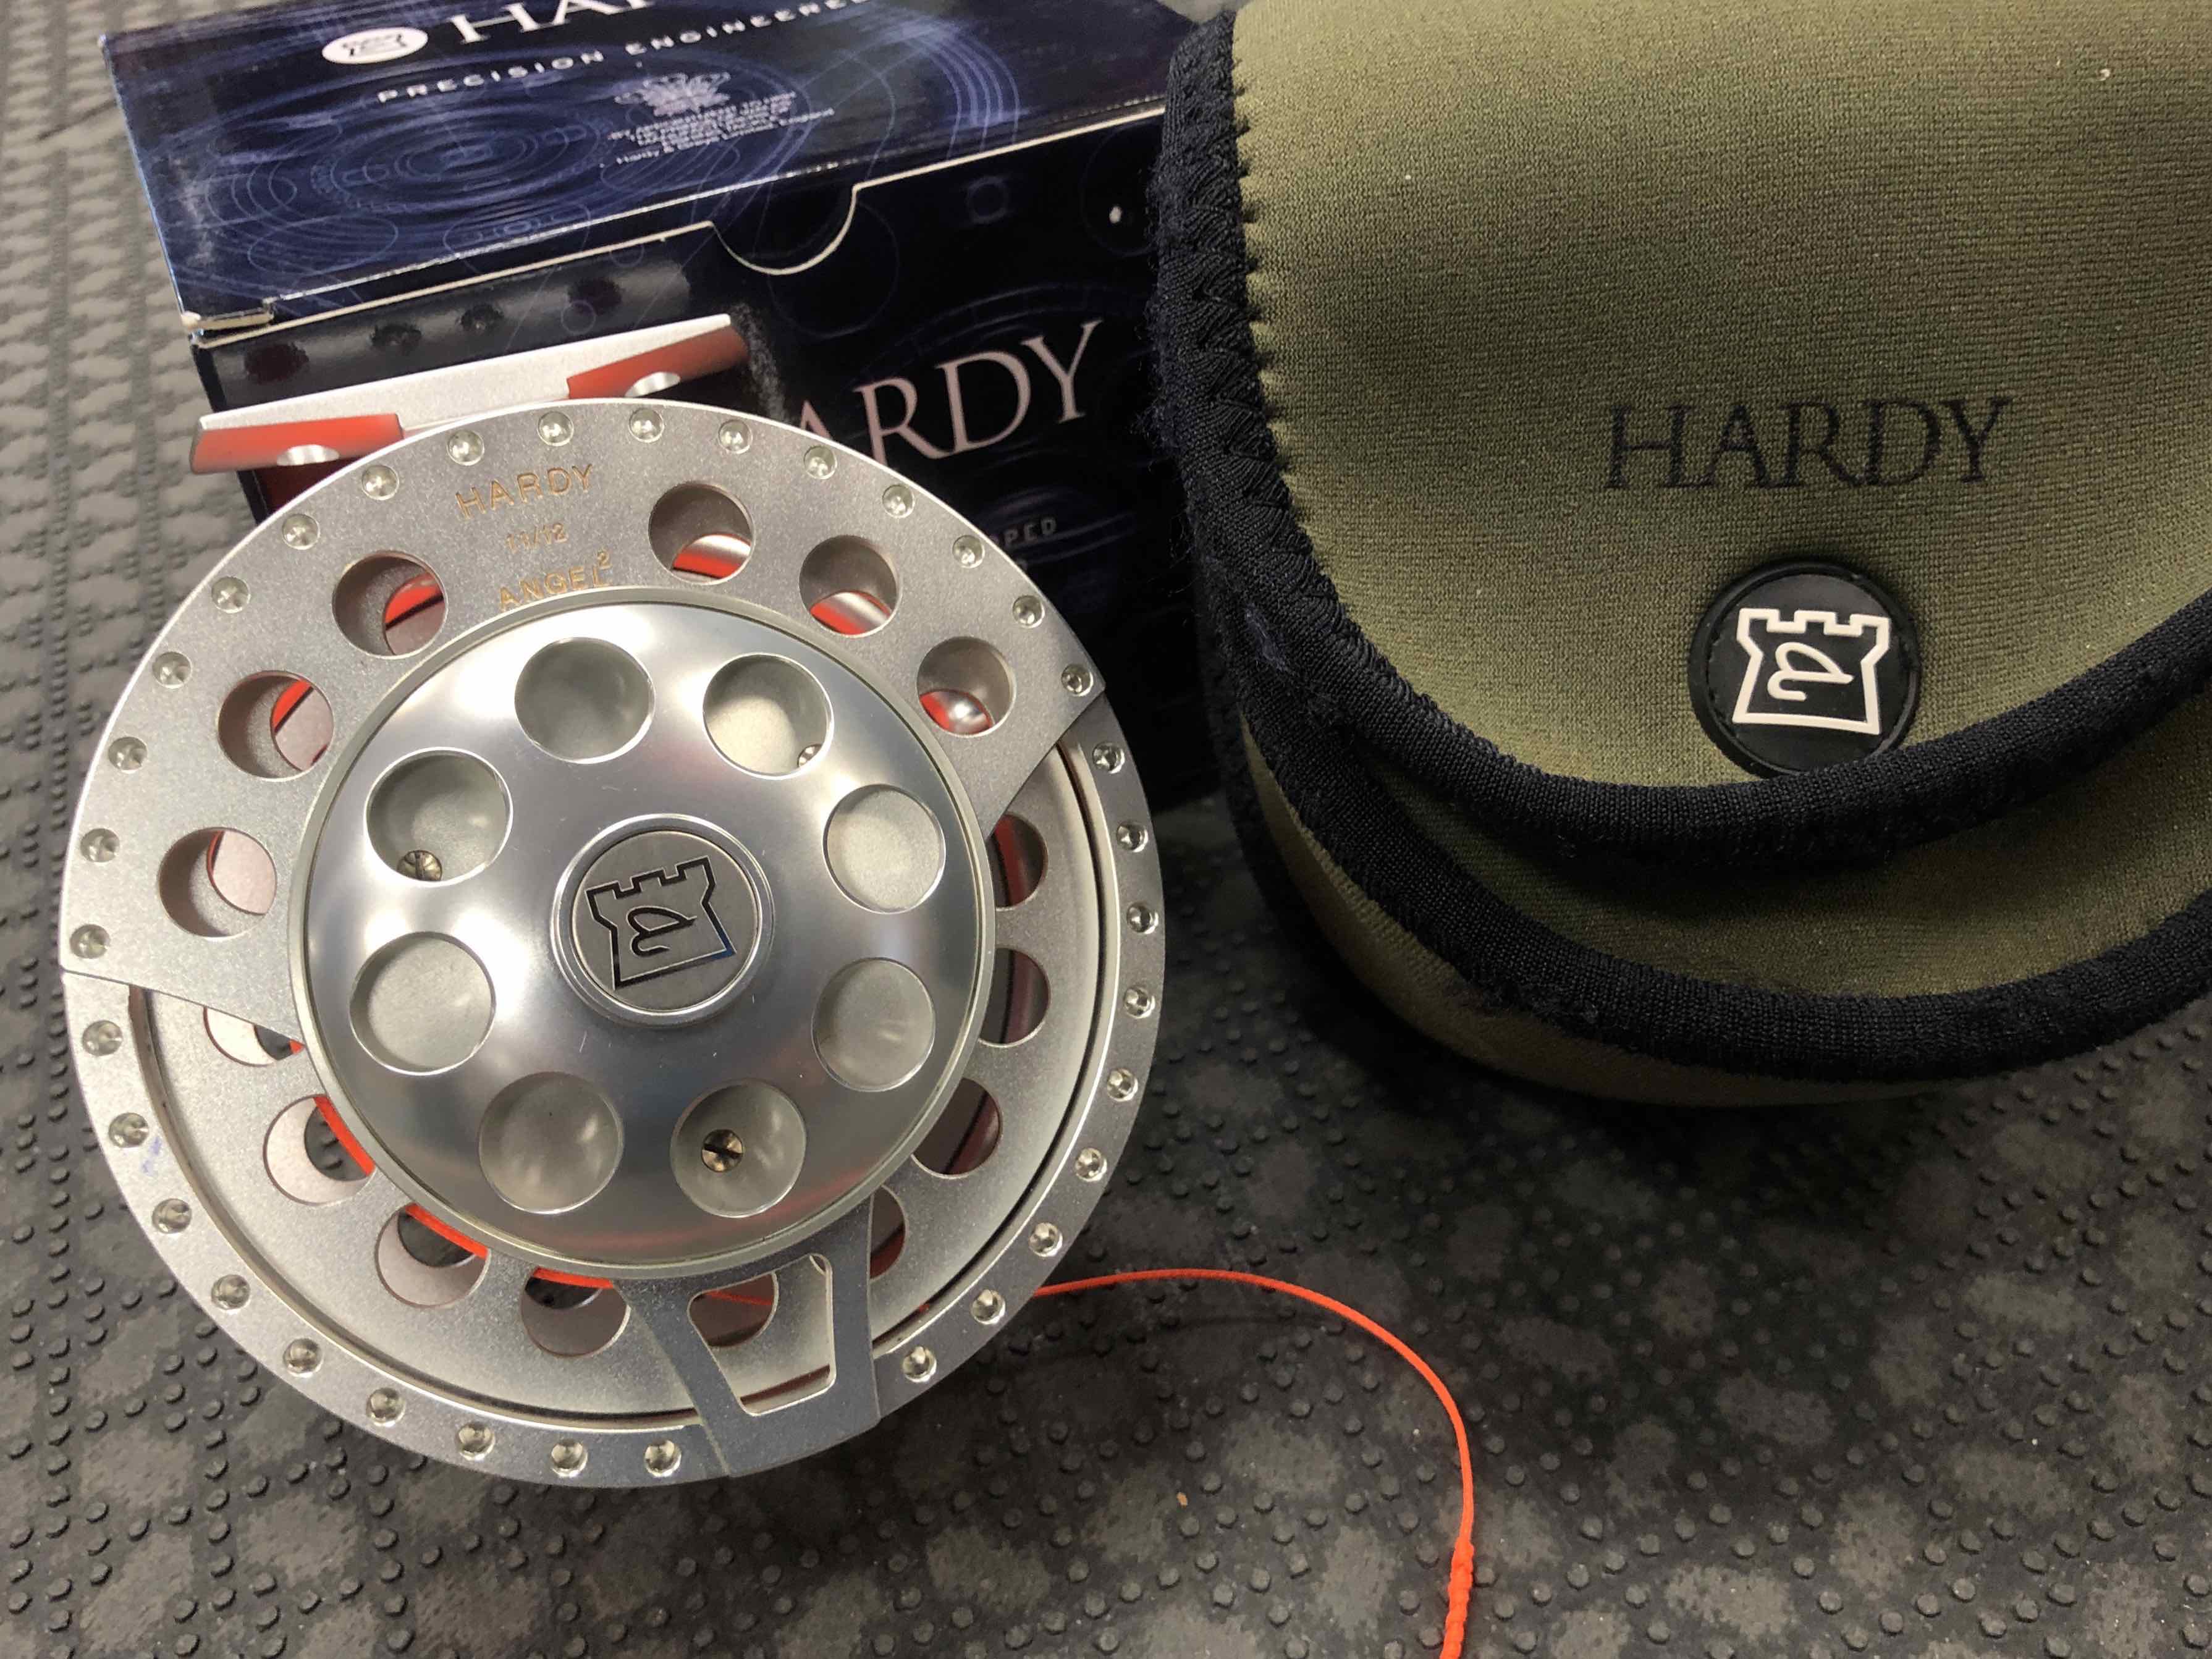 Hardy Angel 2 - 11/12 Spey Reel - C/W Pouch & Box - MINT CONDITION! - $395